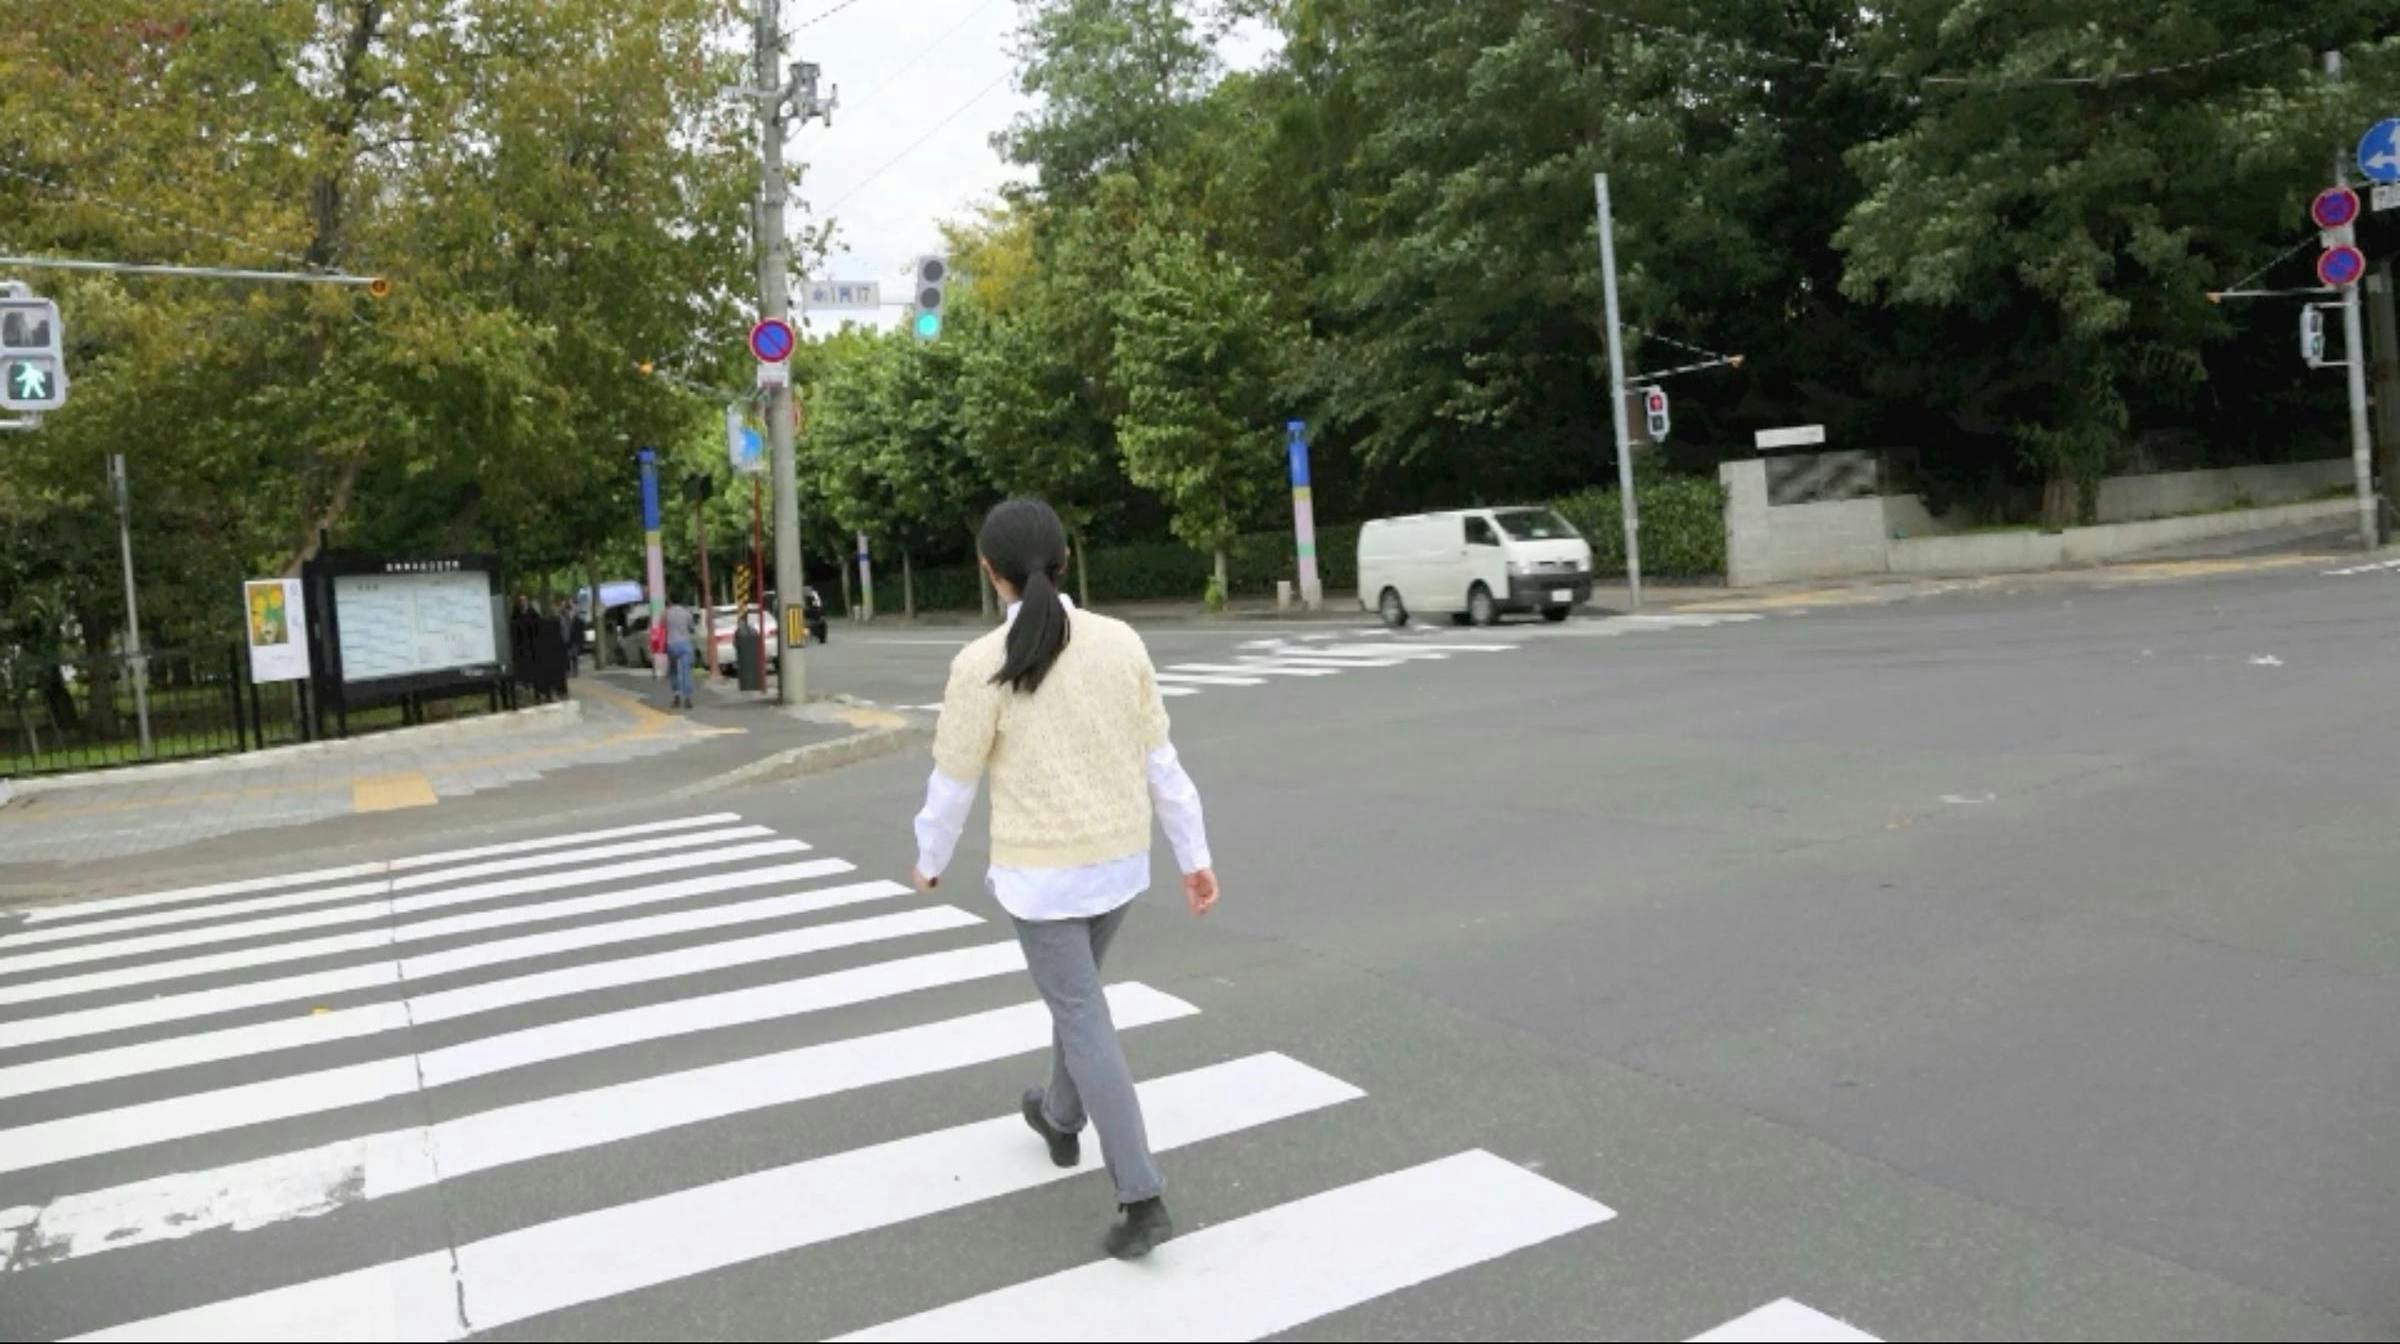 A person crosses a zebra crossing with their back to the camera. The street is emty and it is lined with trees.